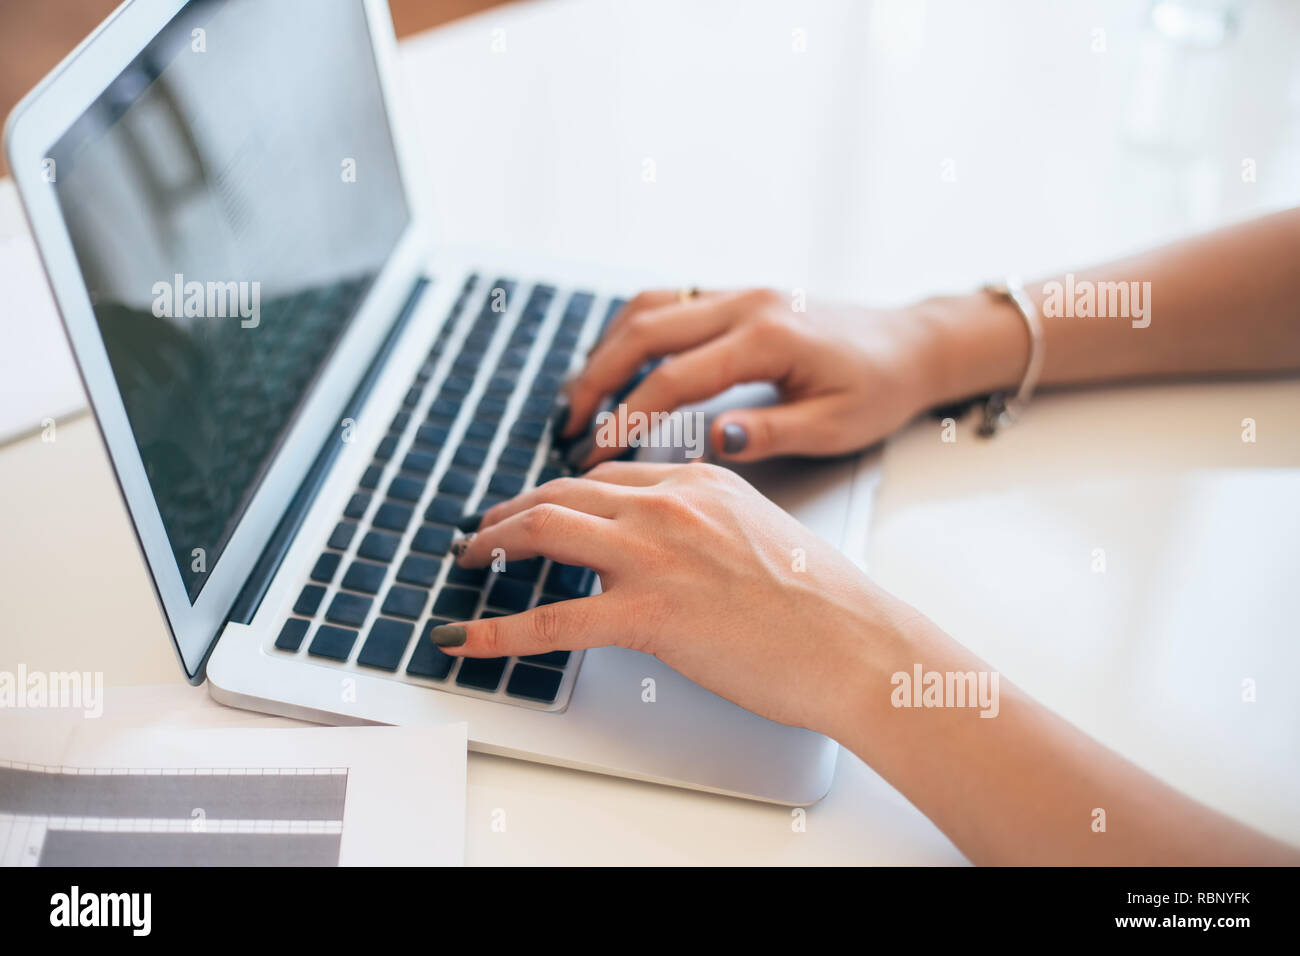 Female hands typing on a laptop keyboard. Woman working at office desk Stock Photo